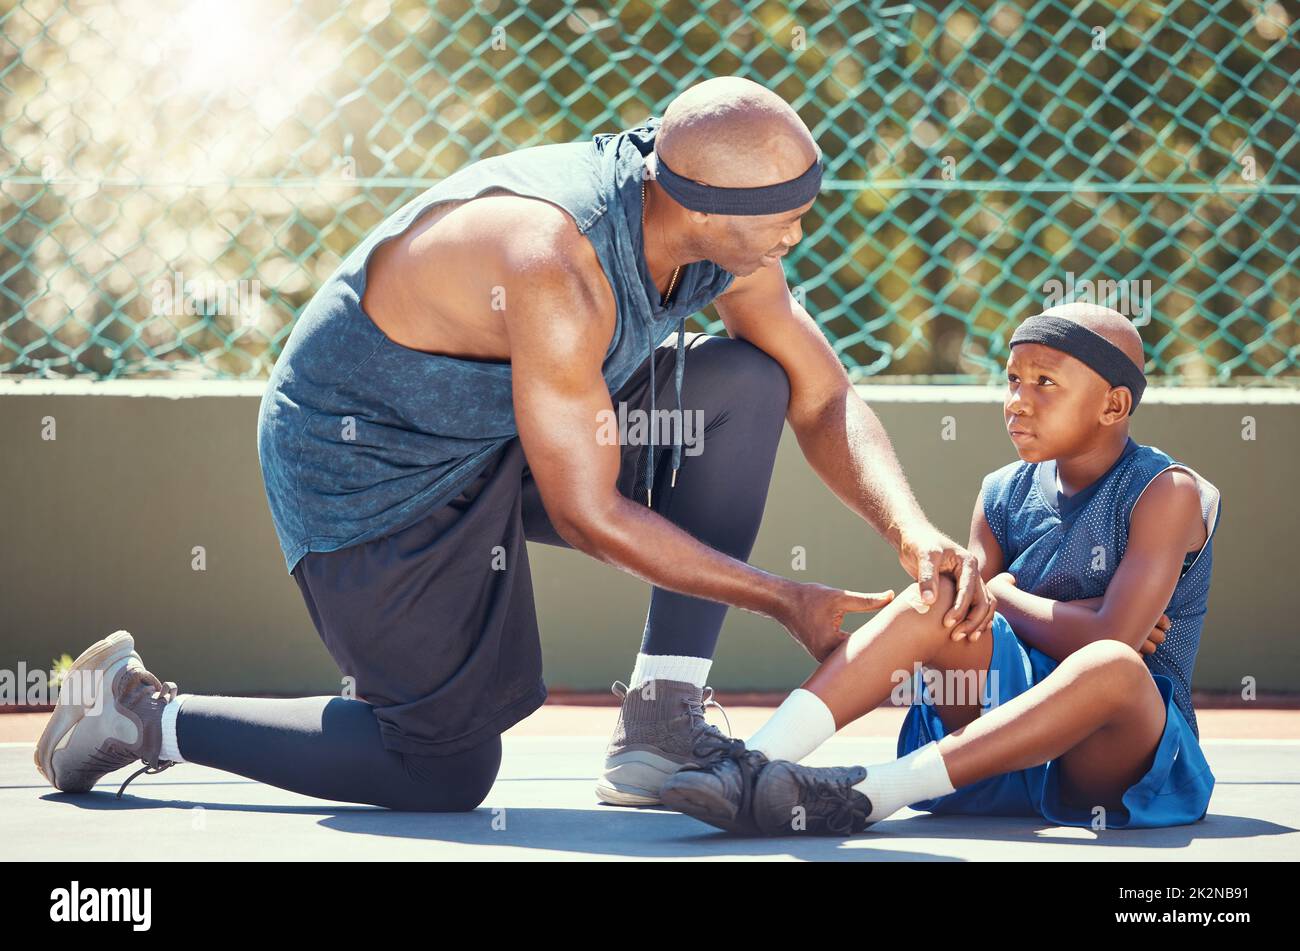 https://c8.alamy.com/comp/2K2NB91/basketball-knee-injury-kid-with-dad-put-emergency-band-aid-for-sports-training-game-accident-at-basketball-court-african-black-father-and-injured-2K2NB91.jpg